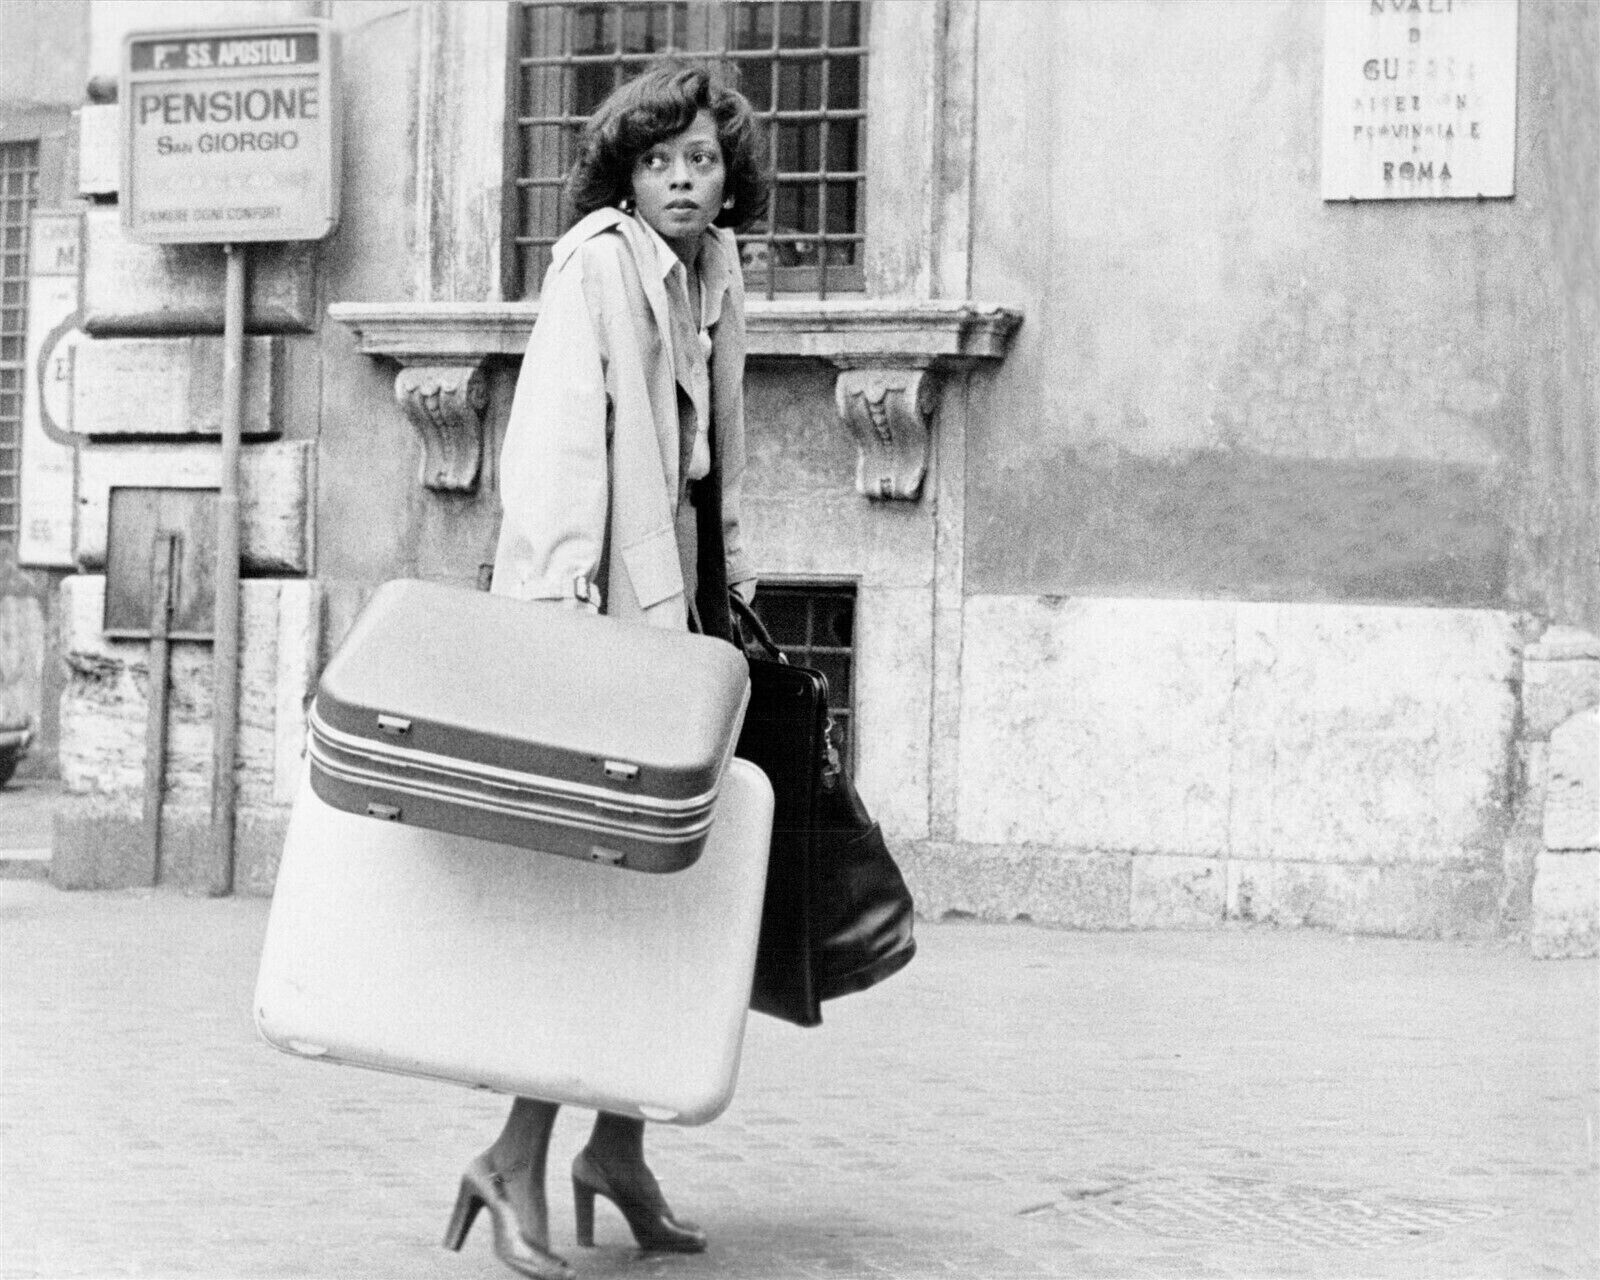 Diana Ross carries her luggage in street 1975 Mahogany 5x7 photo